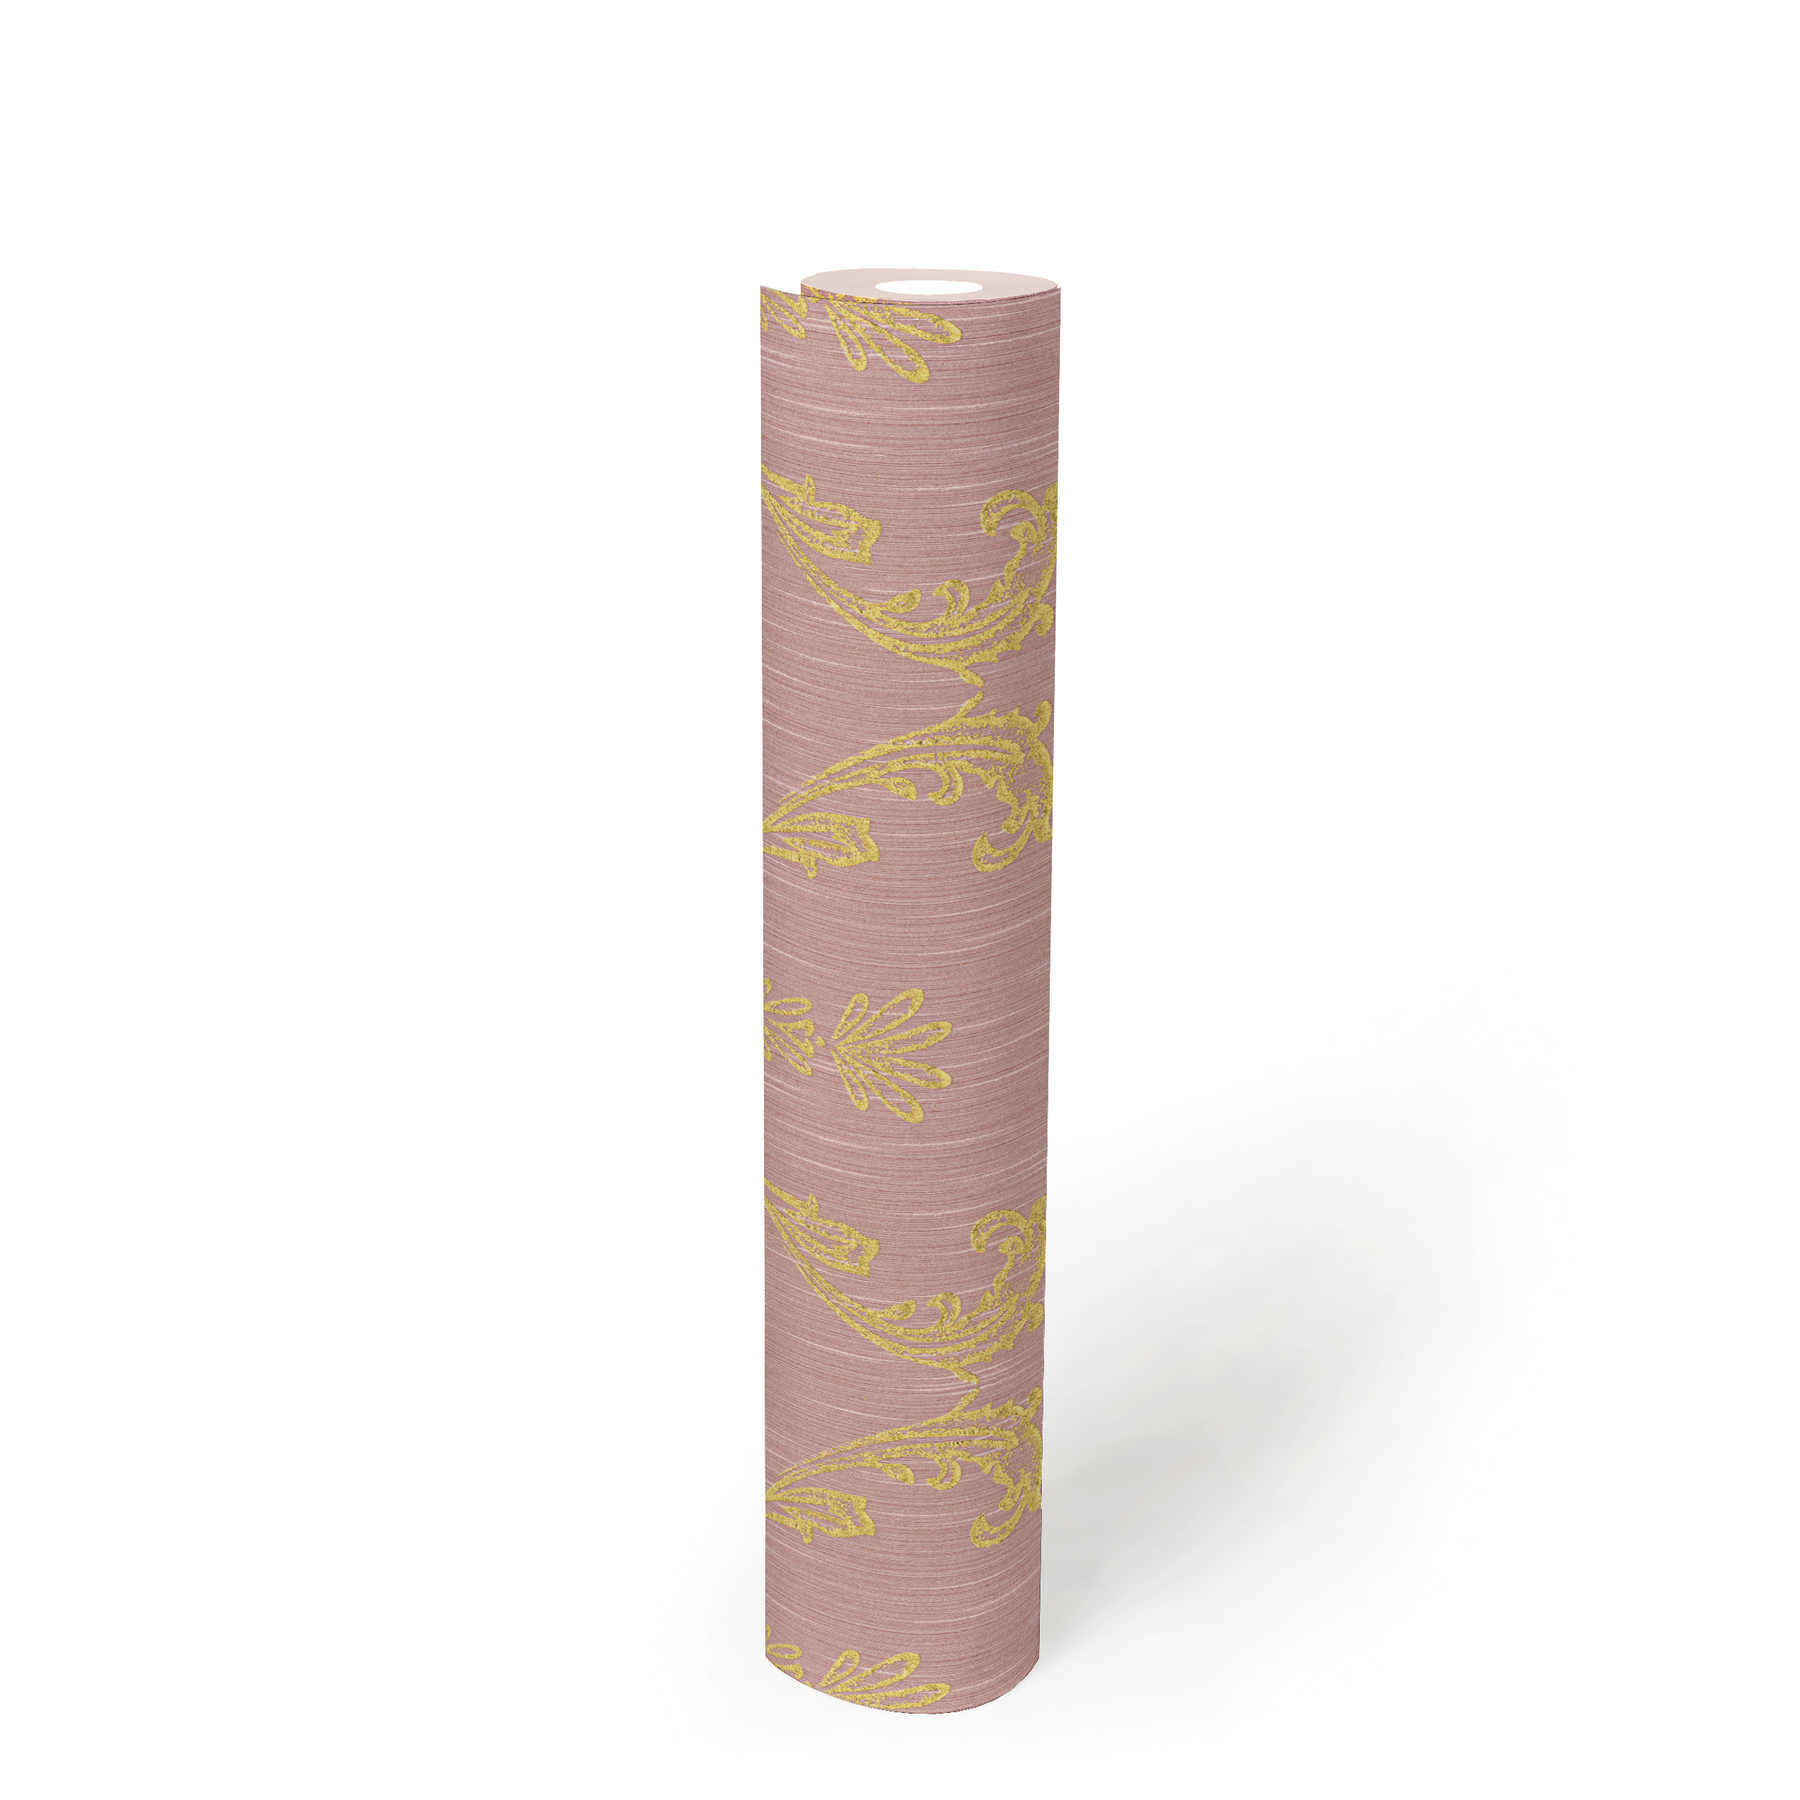             Ornamental wallpaper with floral elements in gold - gold, pink
        